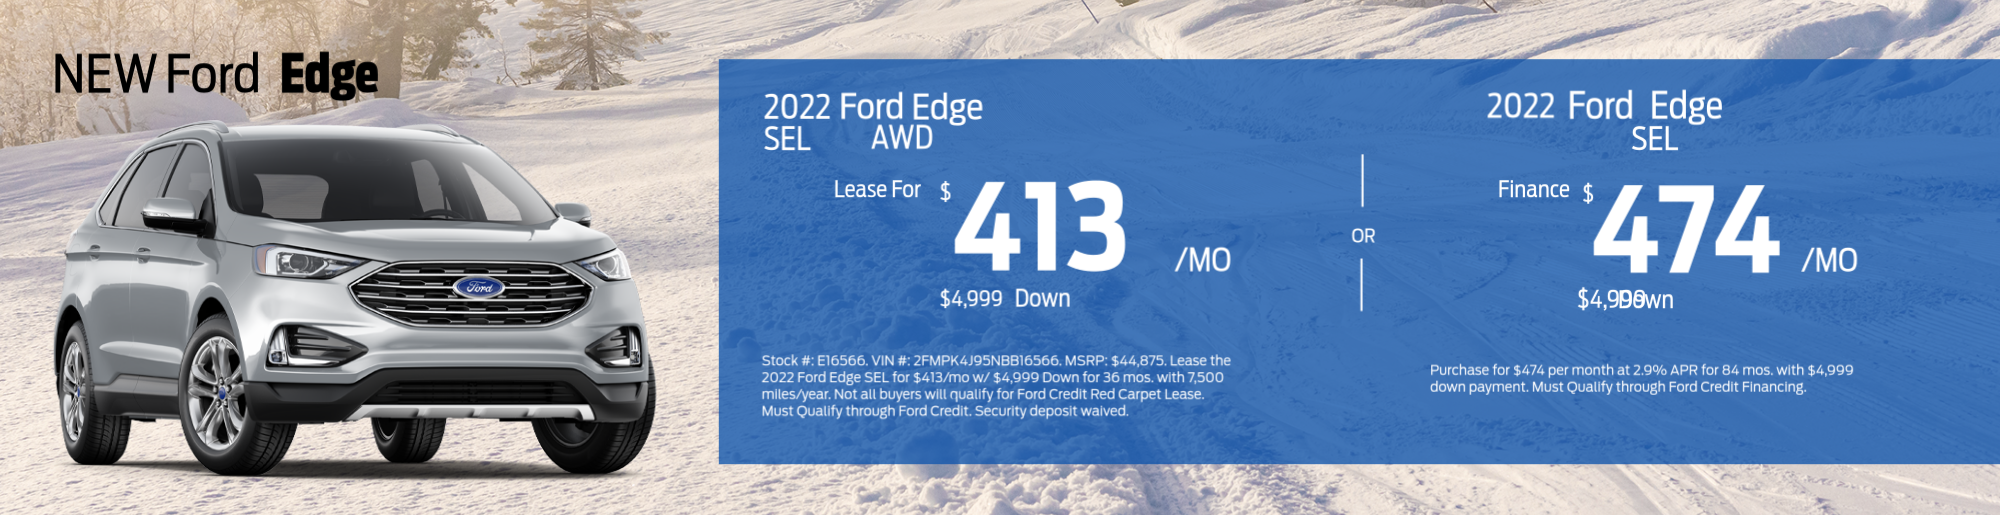 2022 Ford Edge SEL. Lease for $497 per month. $4399 due at signing. 2022 Ford Edge. Buy it for $42,520.